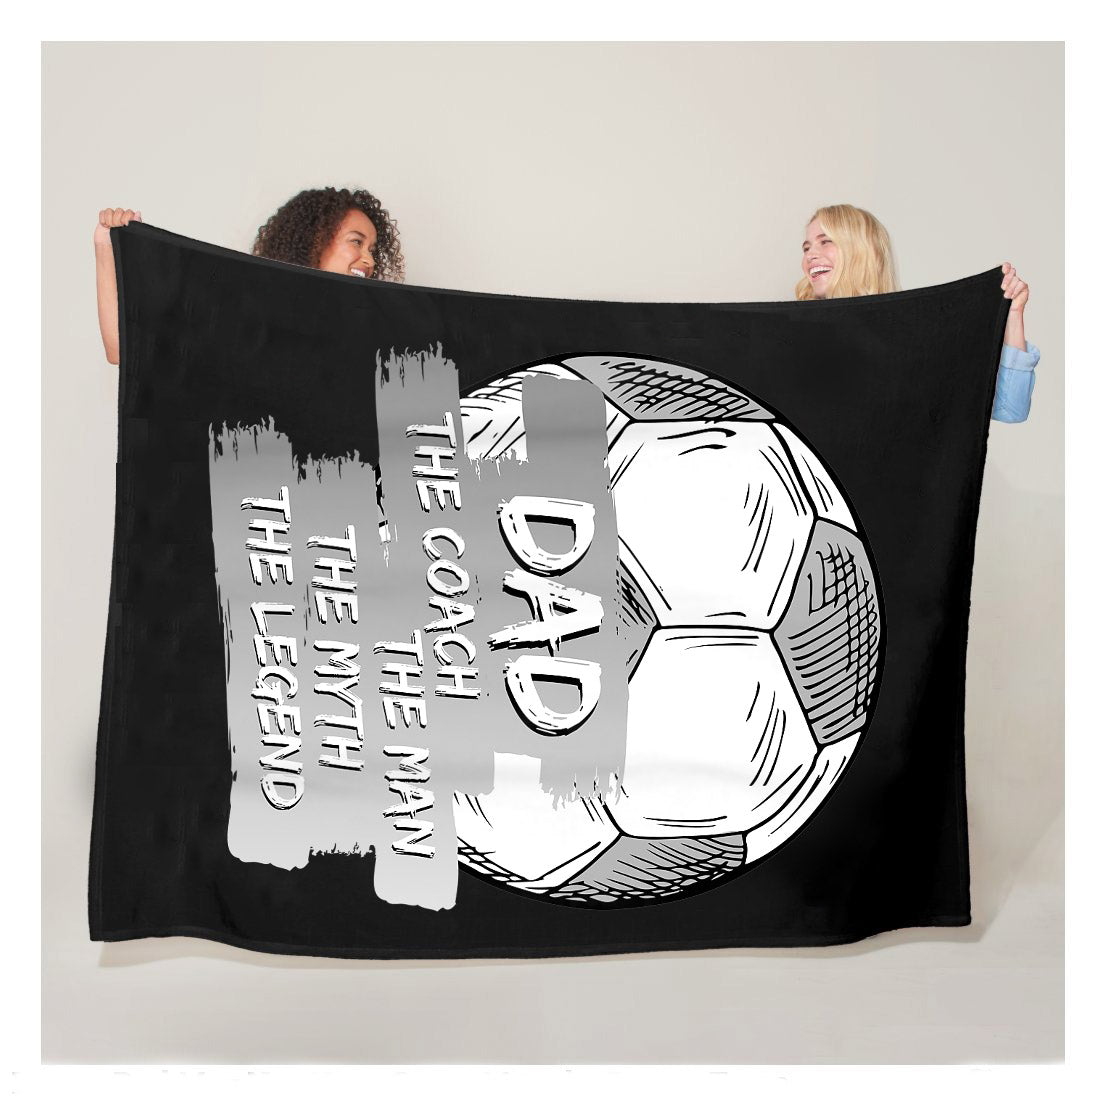 Dad The Coach The Man The Myth The Legend Soccer Dad Gift Sherpa Blanket,  Soccer Blankets, Soccer Gifts, Happy Fathers Day Gift Ideas For Dad